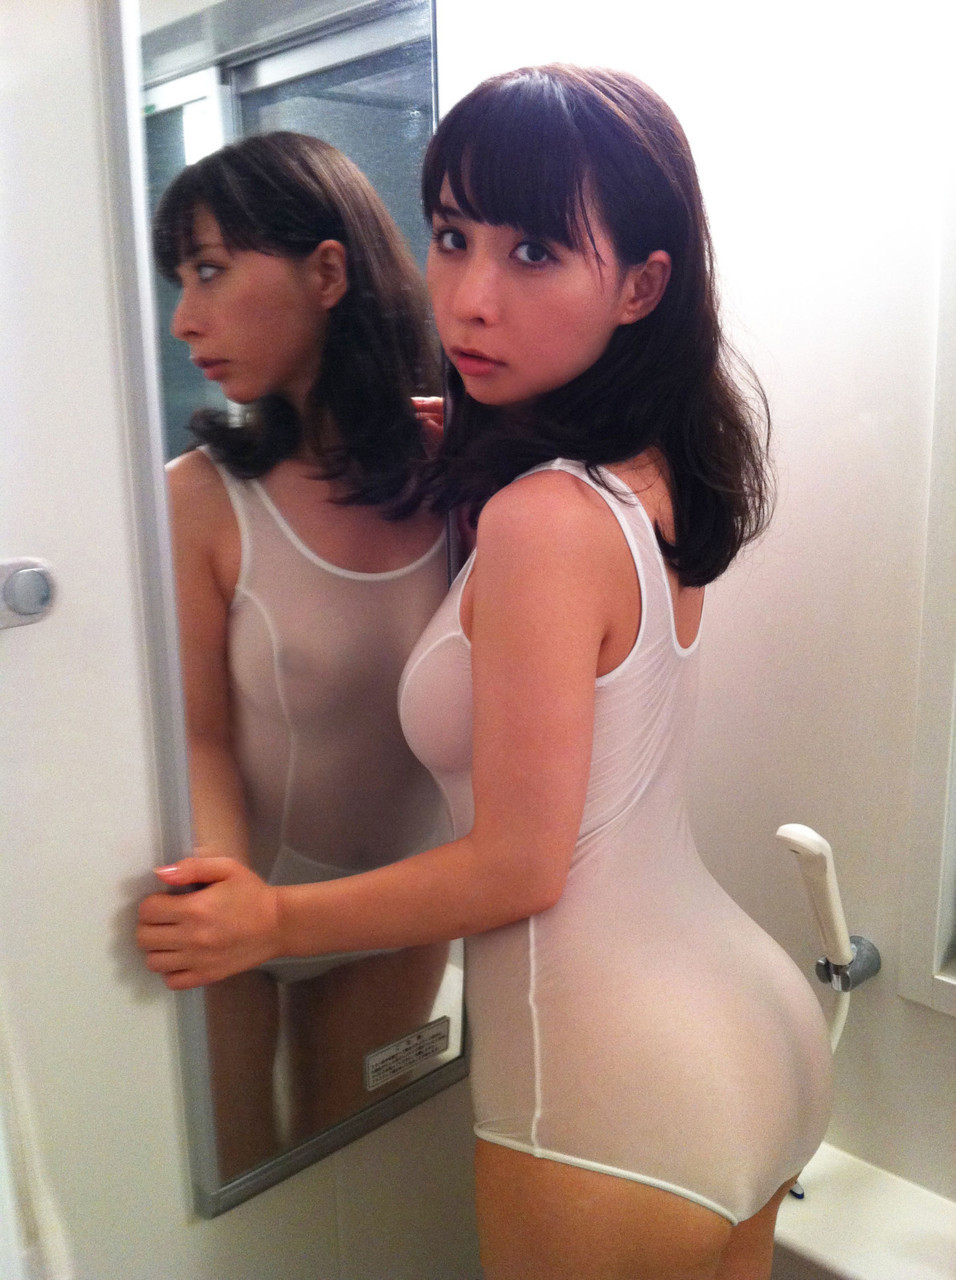 Tight lil asian booty.[follow for loads more from her] - Certified #KillerKurves 